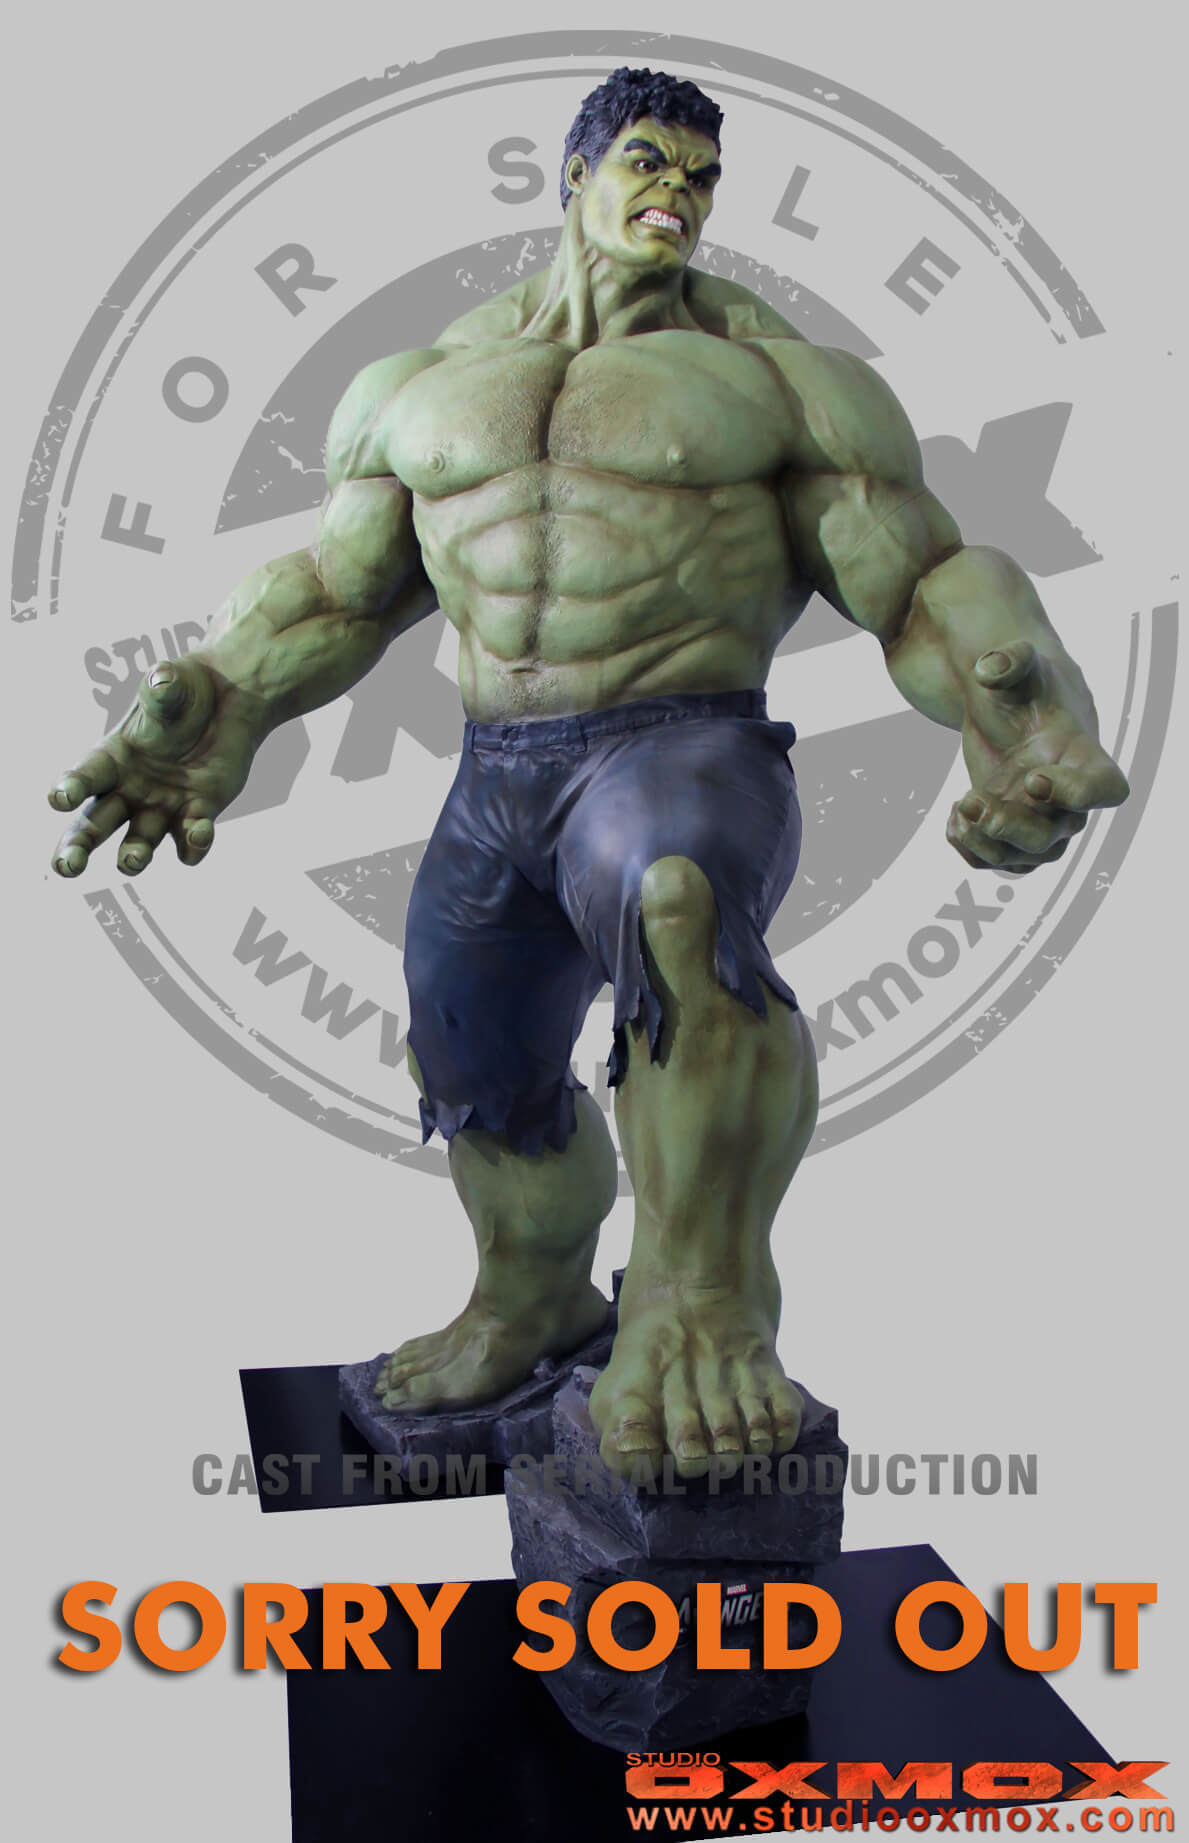 hulk avengers statue life size for sale